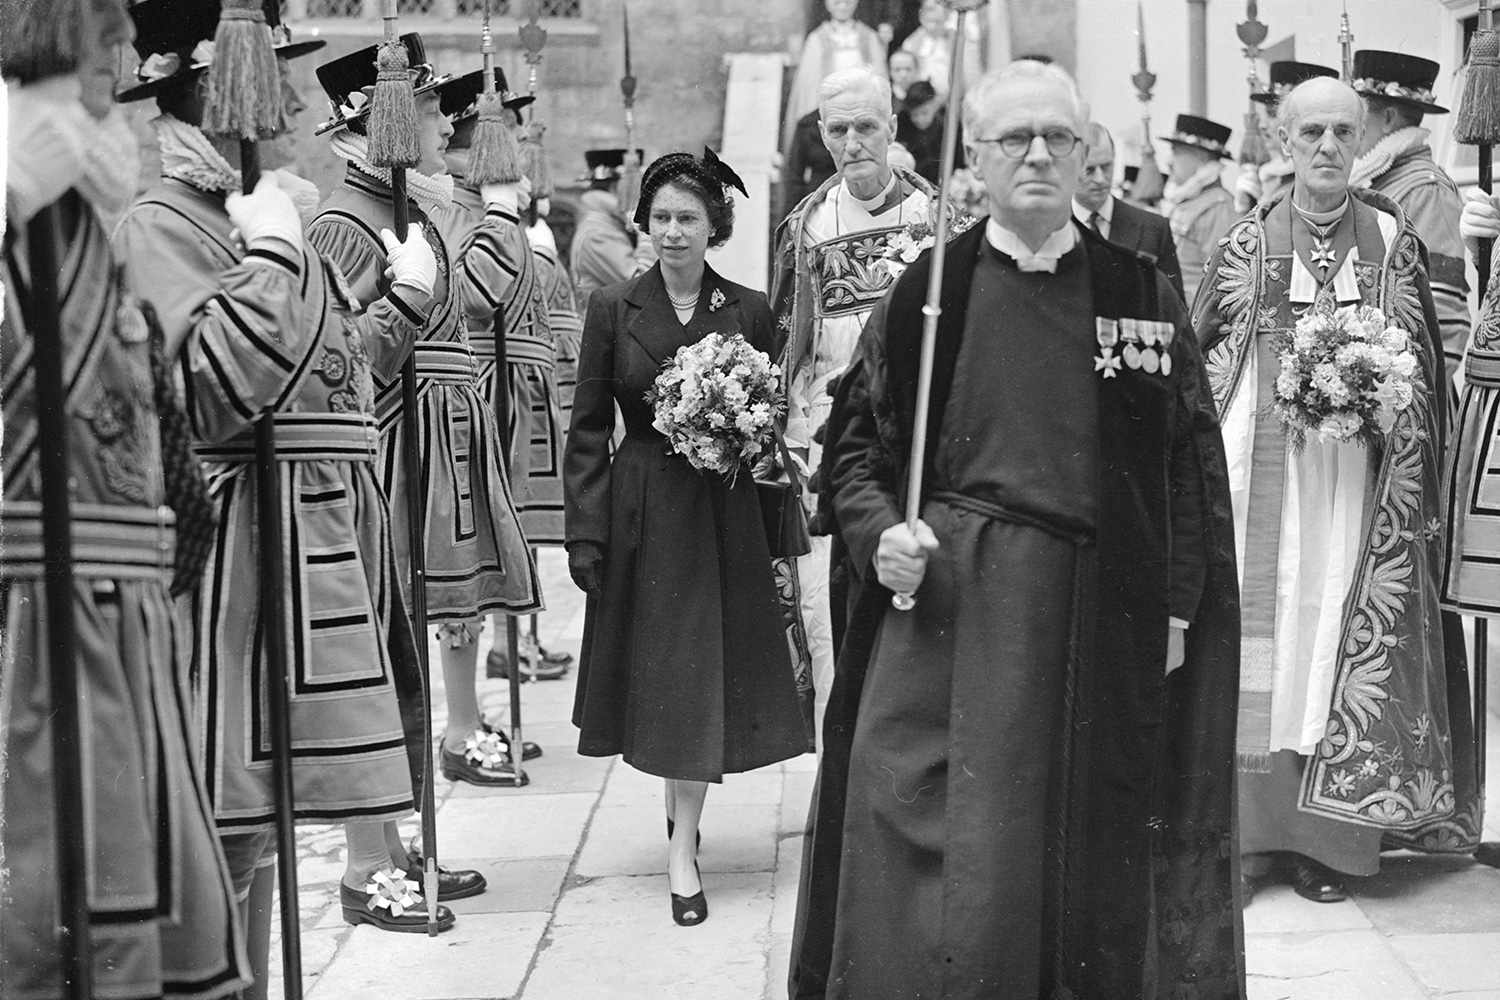 10th April 1952: Queen Elizabeth II leaving Westminster Abbey, London, through a guard of honour of Yeoman of the Guard after carrying out the ancient ceremony of distributing Maundy money to 26 men and women. It is the first public engagement of her reign.